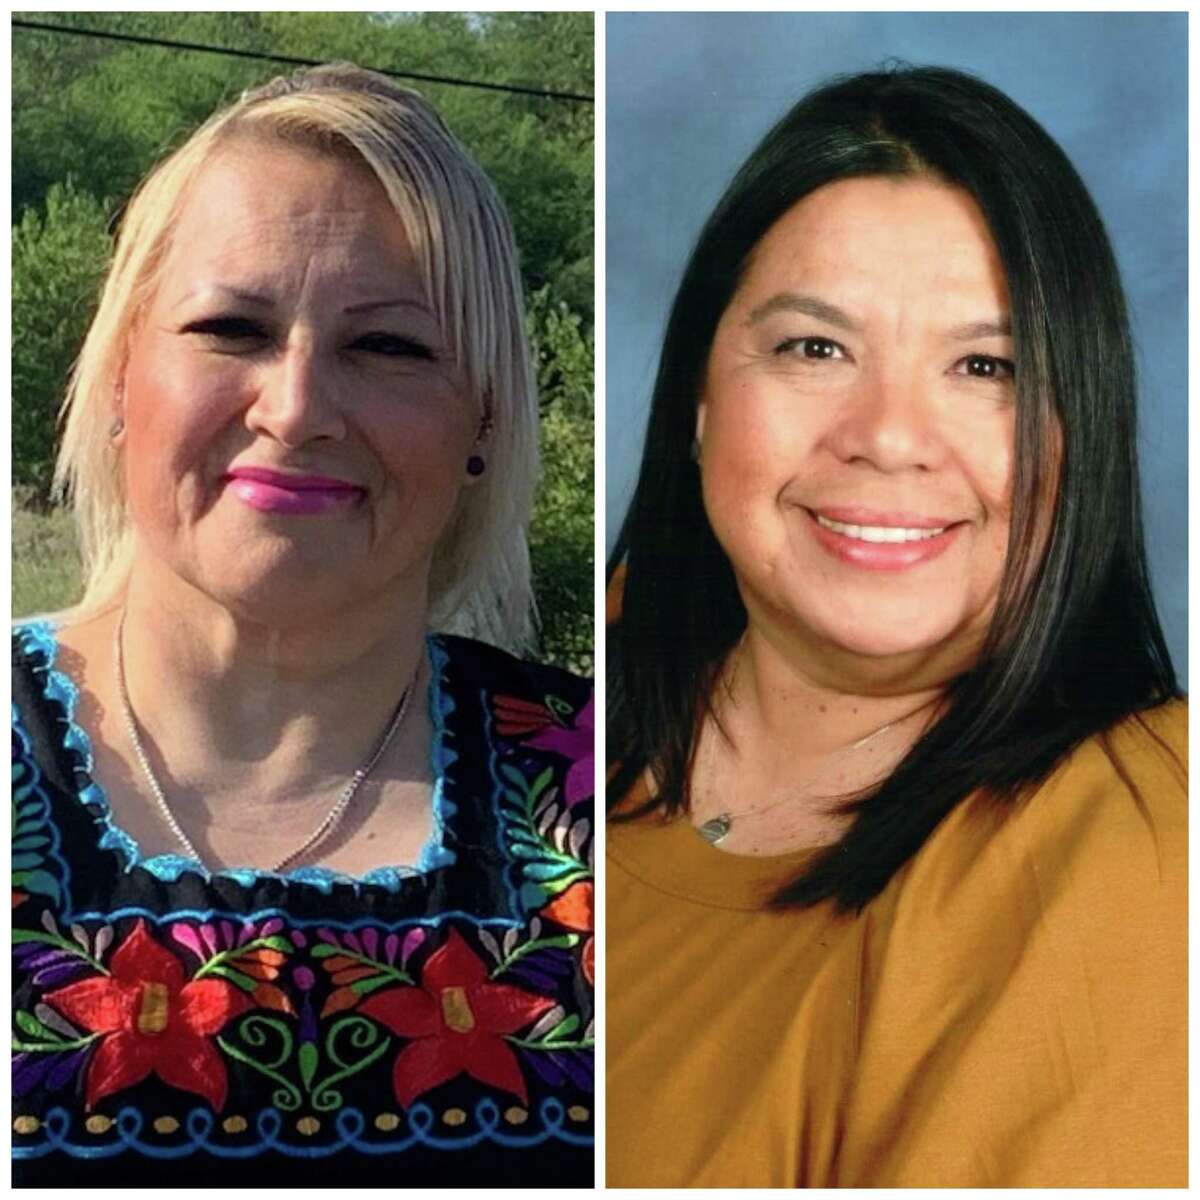 A victory for Gina Villagomez, left, over Veronica Barba for a South San ISD board seat is a welcome change. But more change is needed to put this troubled district on the right path.